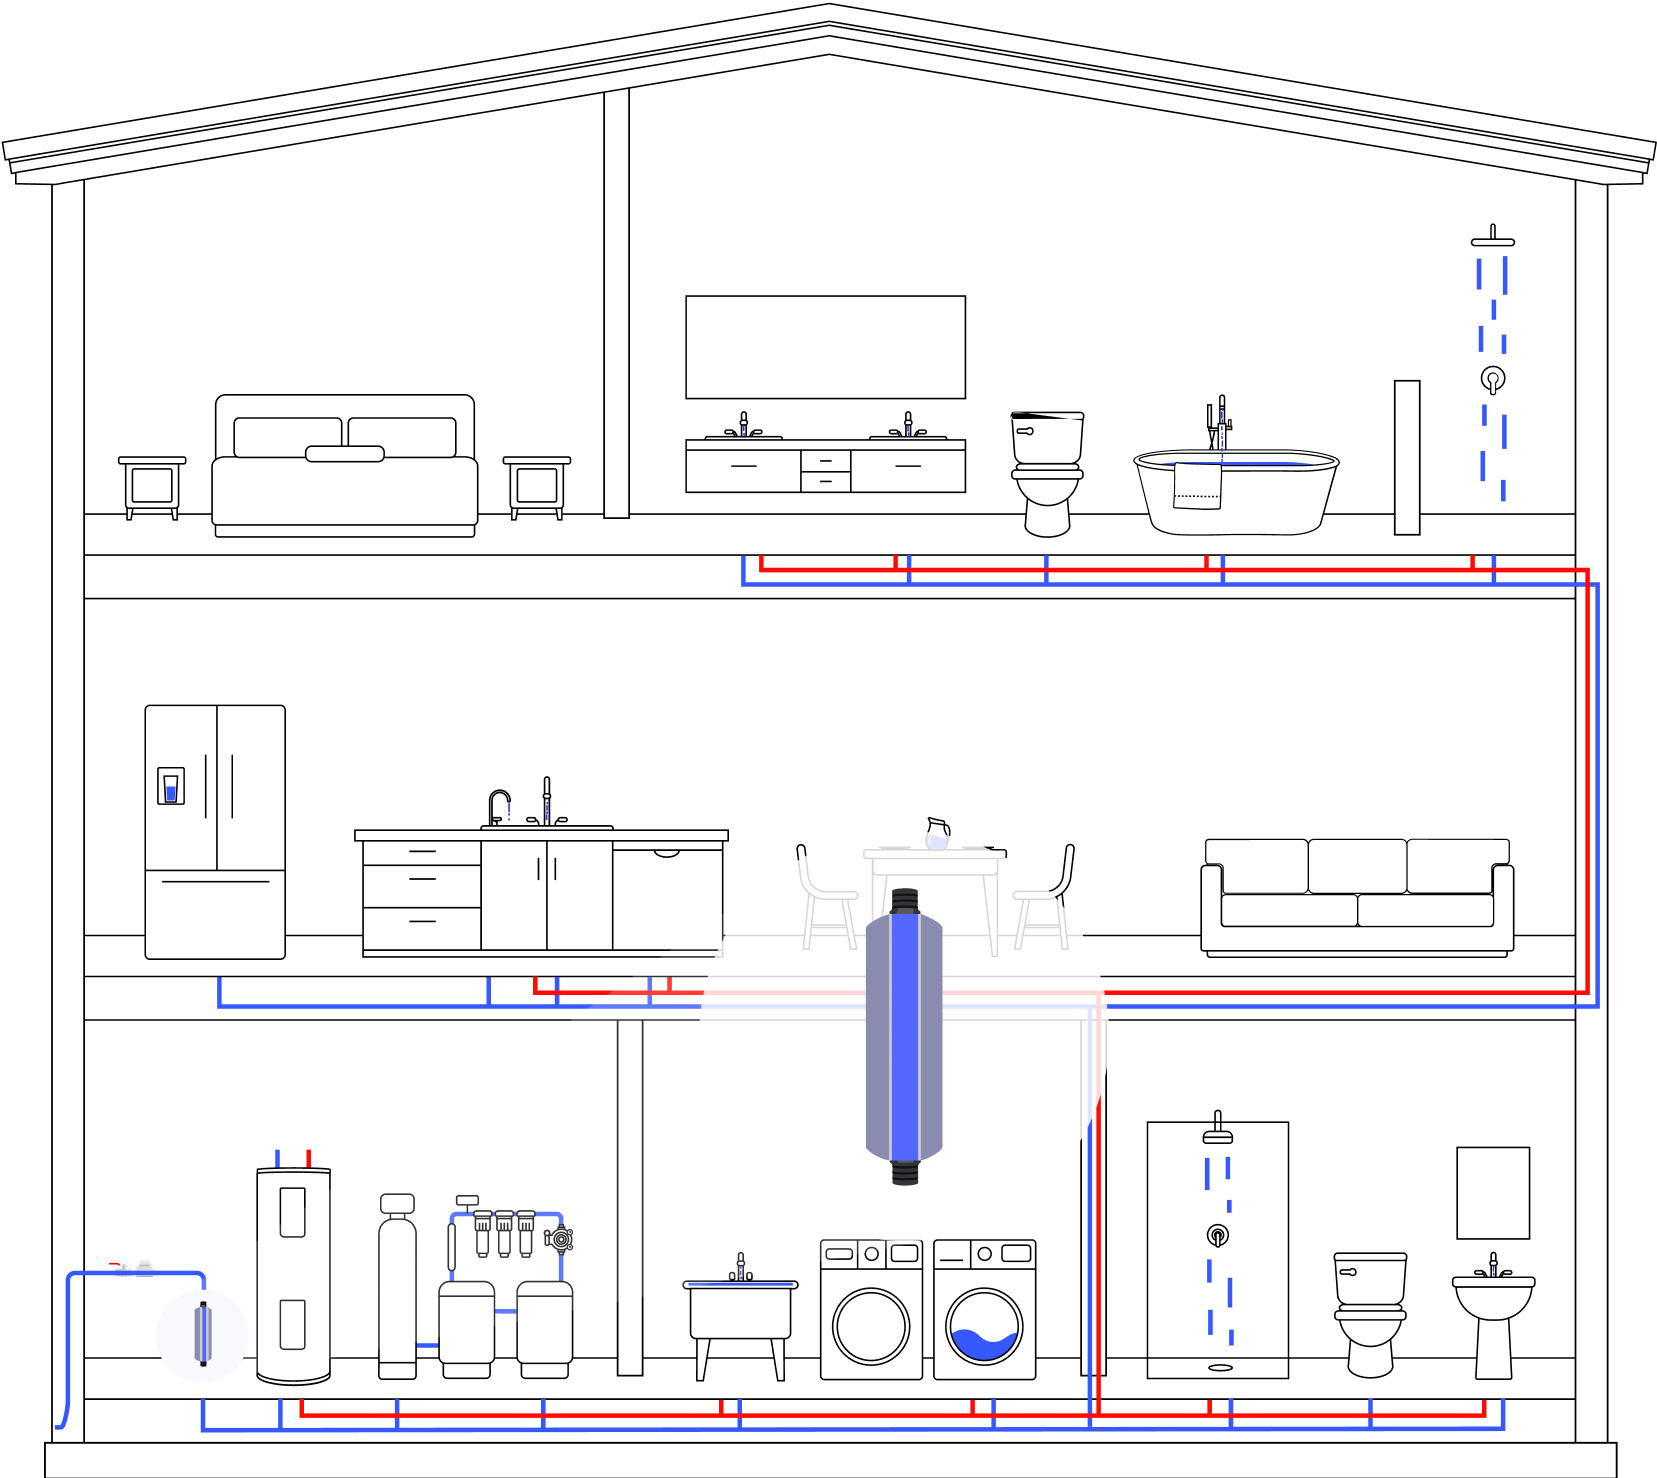 Diagram of how Phyn connects to the water in a house